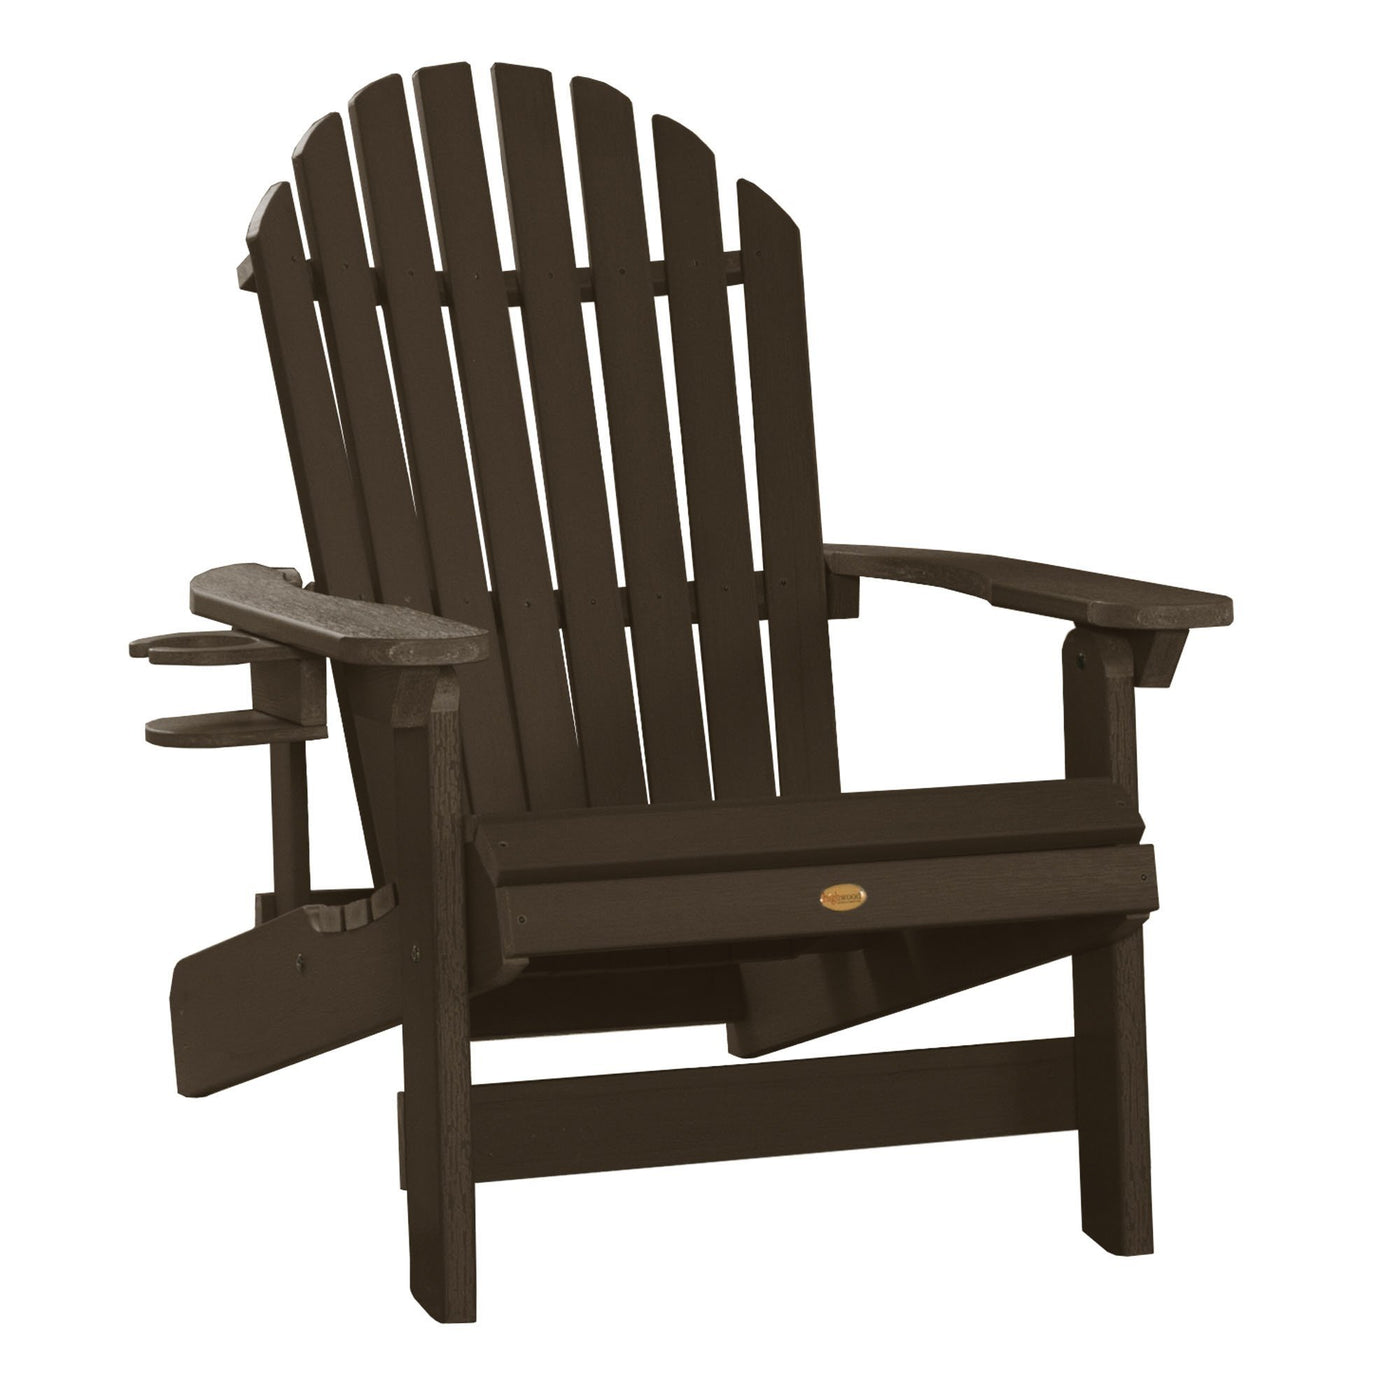 1 King Hamilton Folding and Reclining Adirondack Chair with 1 Easy-add Cup Holder Highwood USA Weathered Acorn 